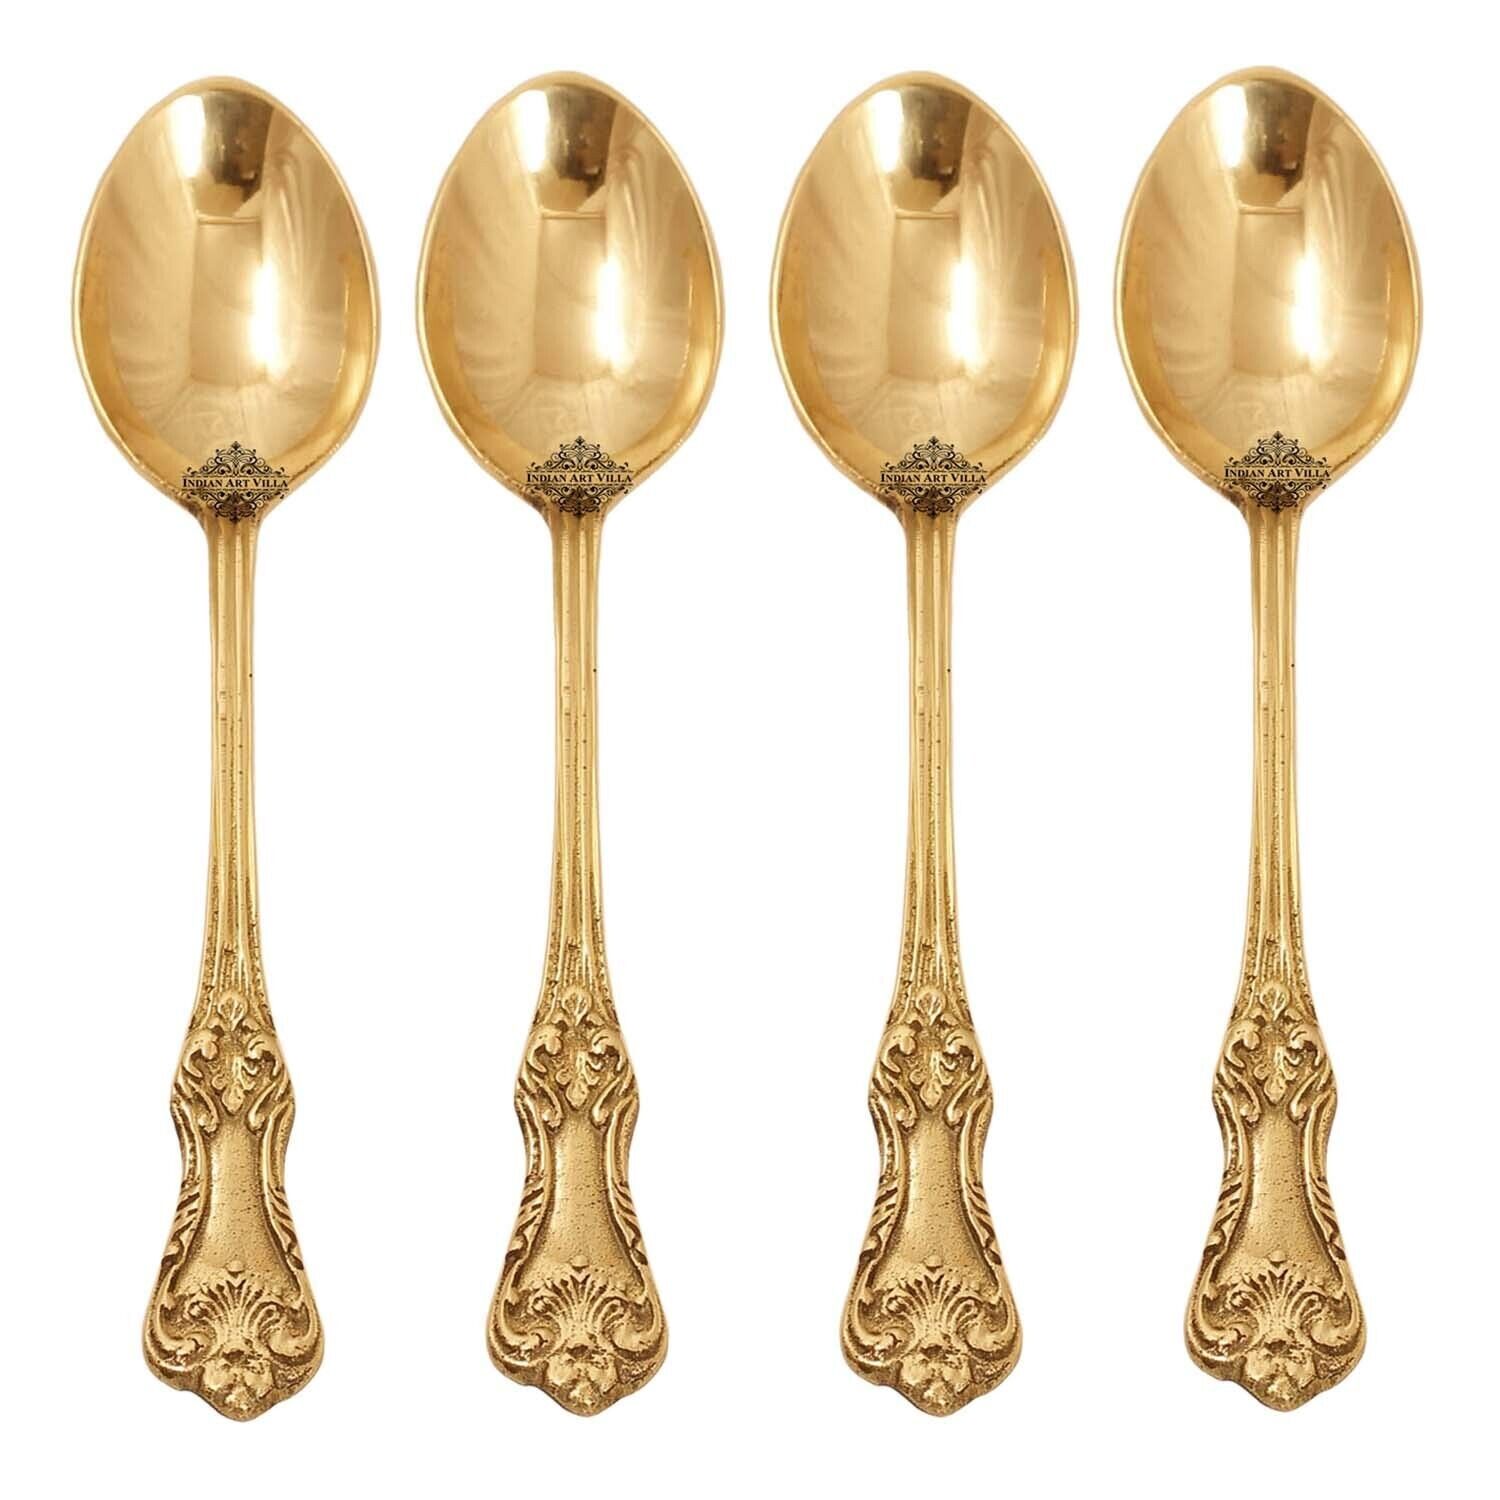 4 Pack Soup Spoons, Brass Spoon For Coffee Tea,Table Serving Cooking